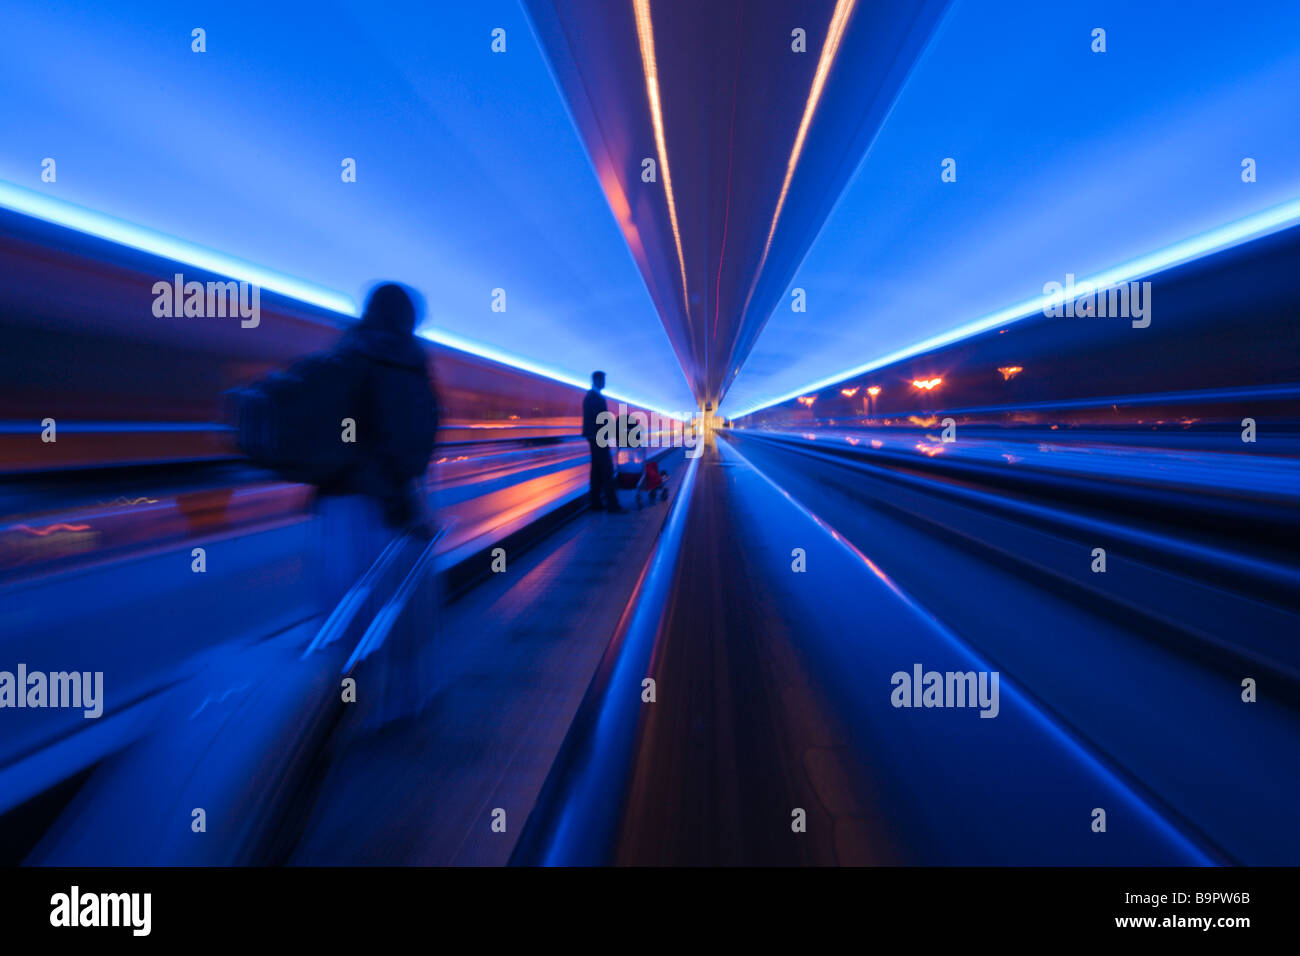 Manchester Airport UK the passenger connection walkways with travelators at night Stock Photo